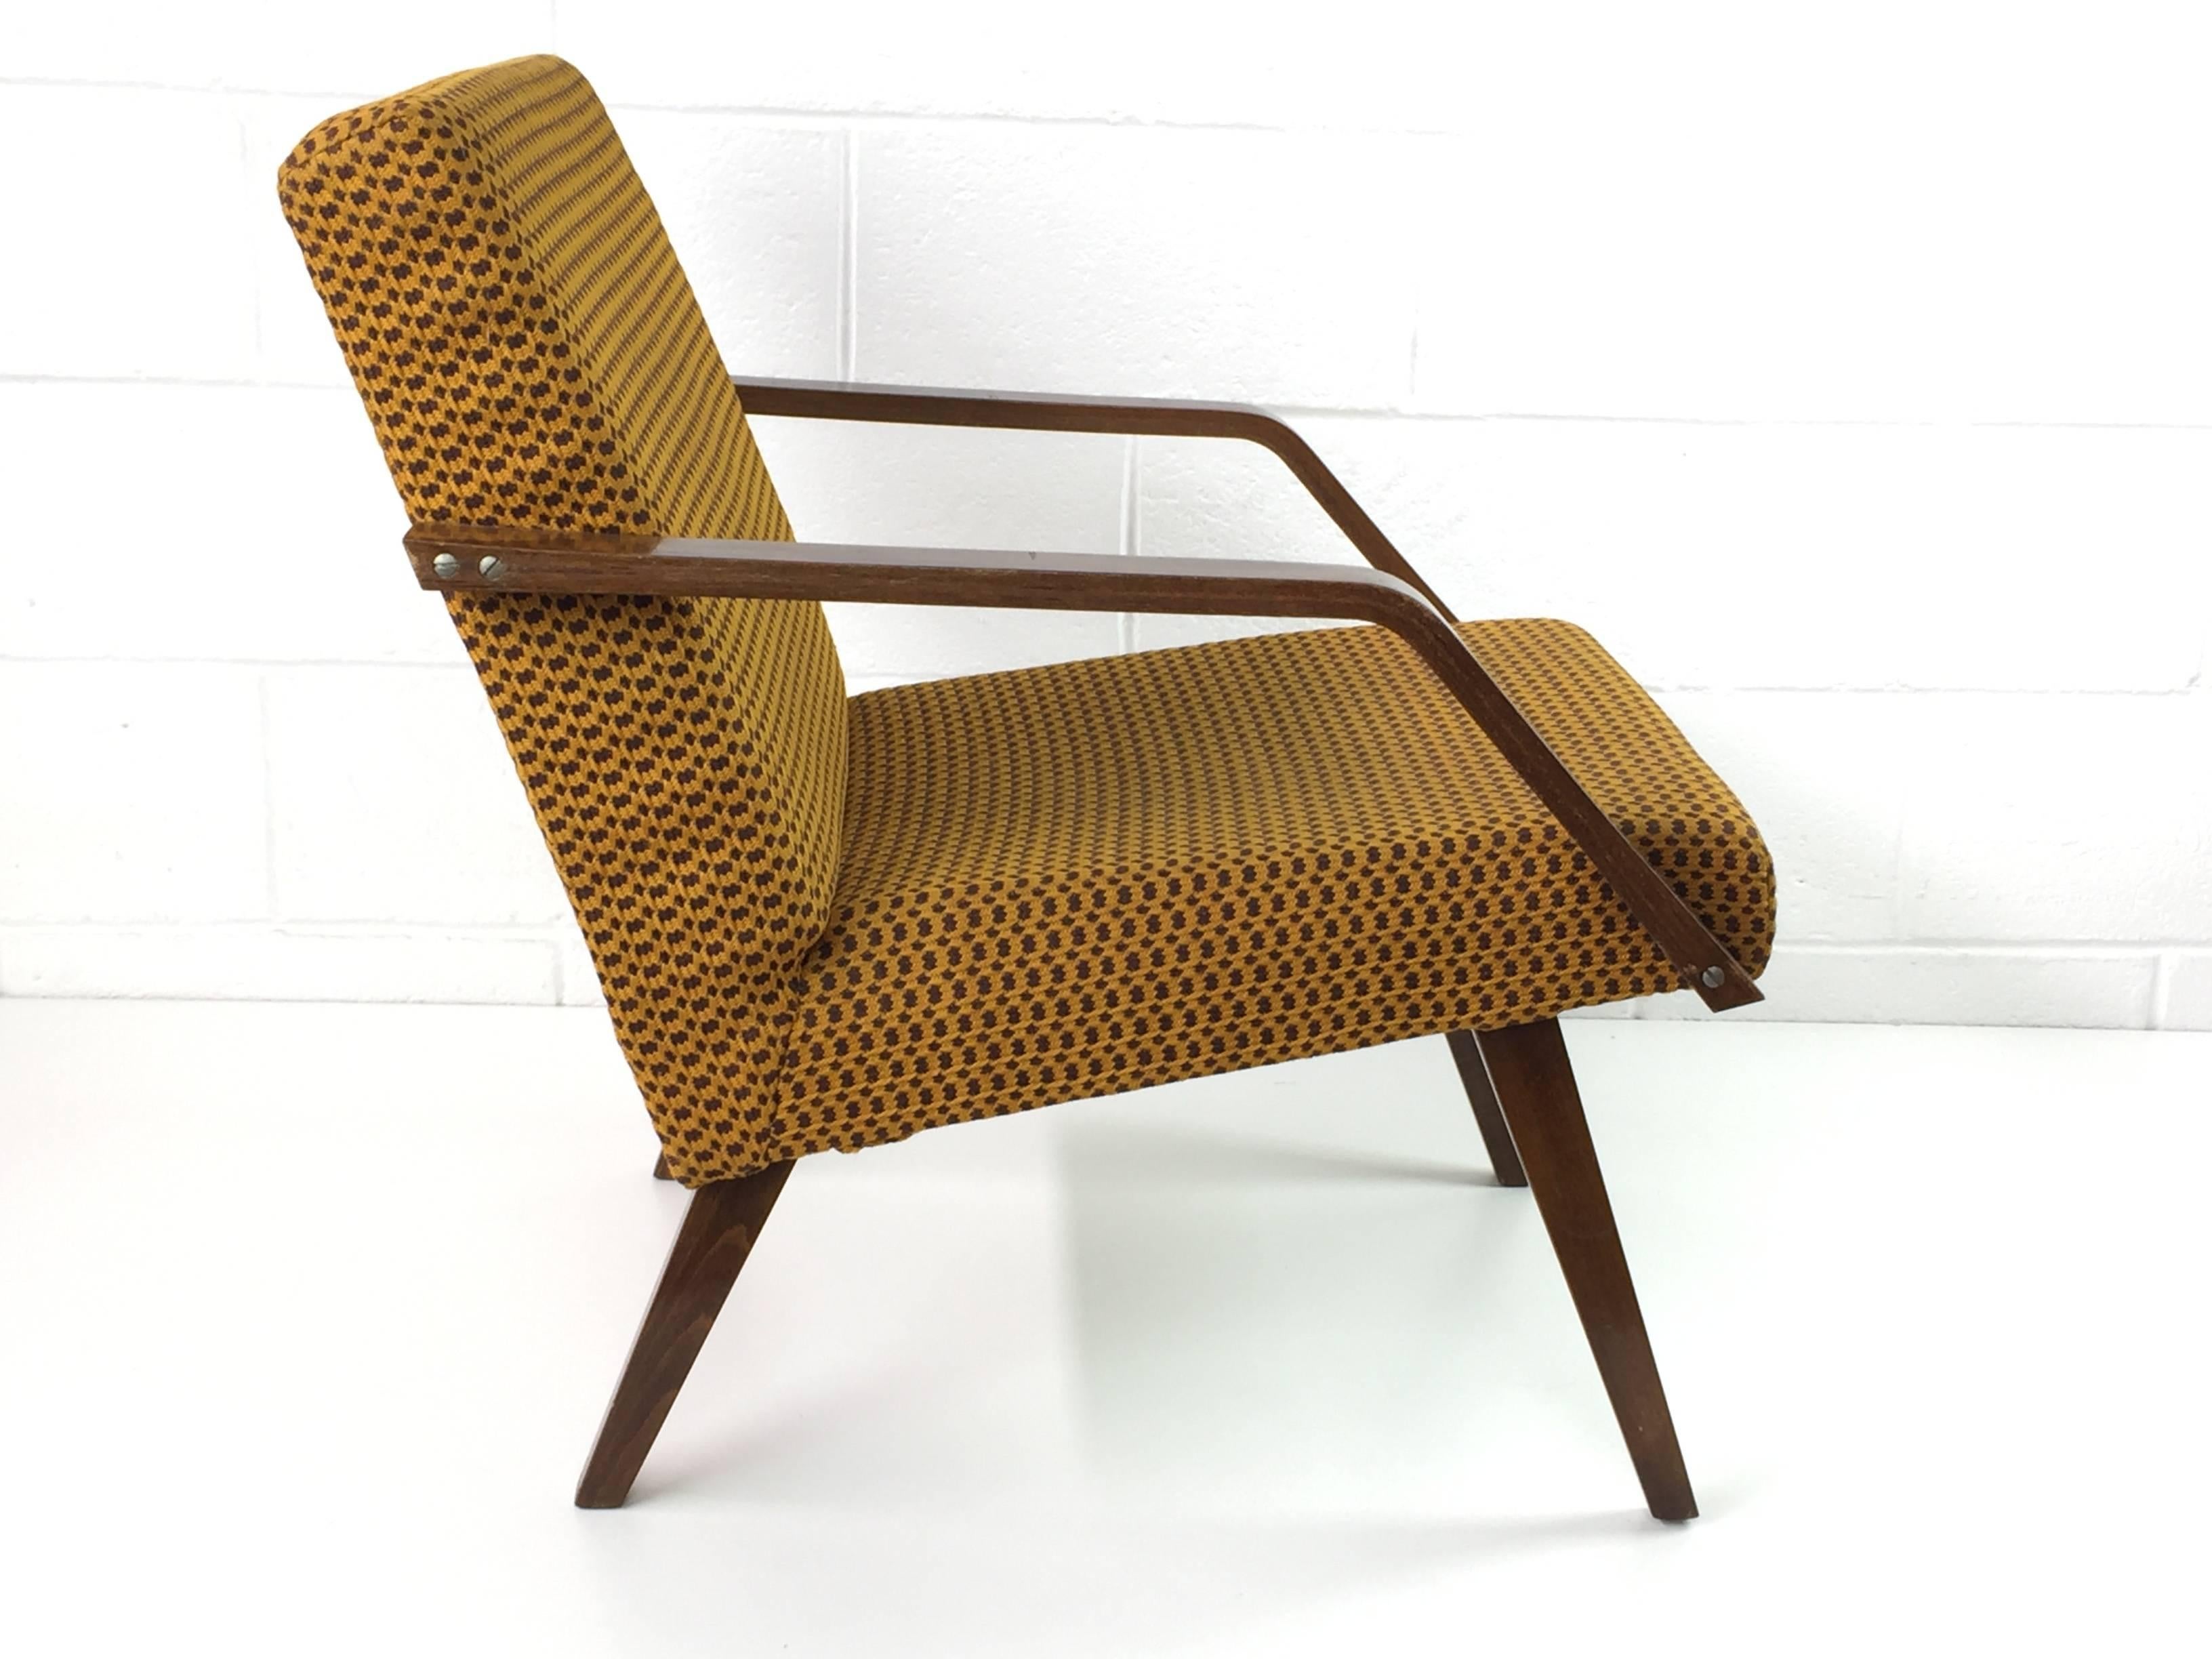 This armchair shows the Scandinavian influence on Czech design with its Minimalist form. This chair is in original condition and originates from former Czechoslovakia.